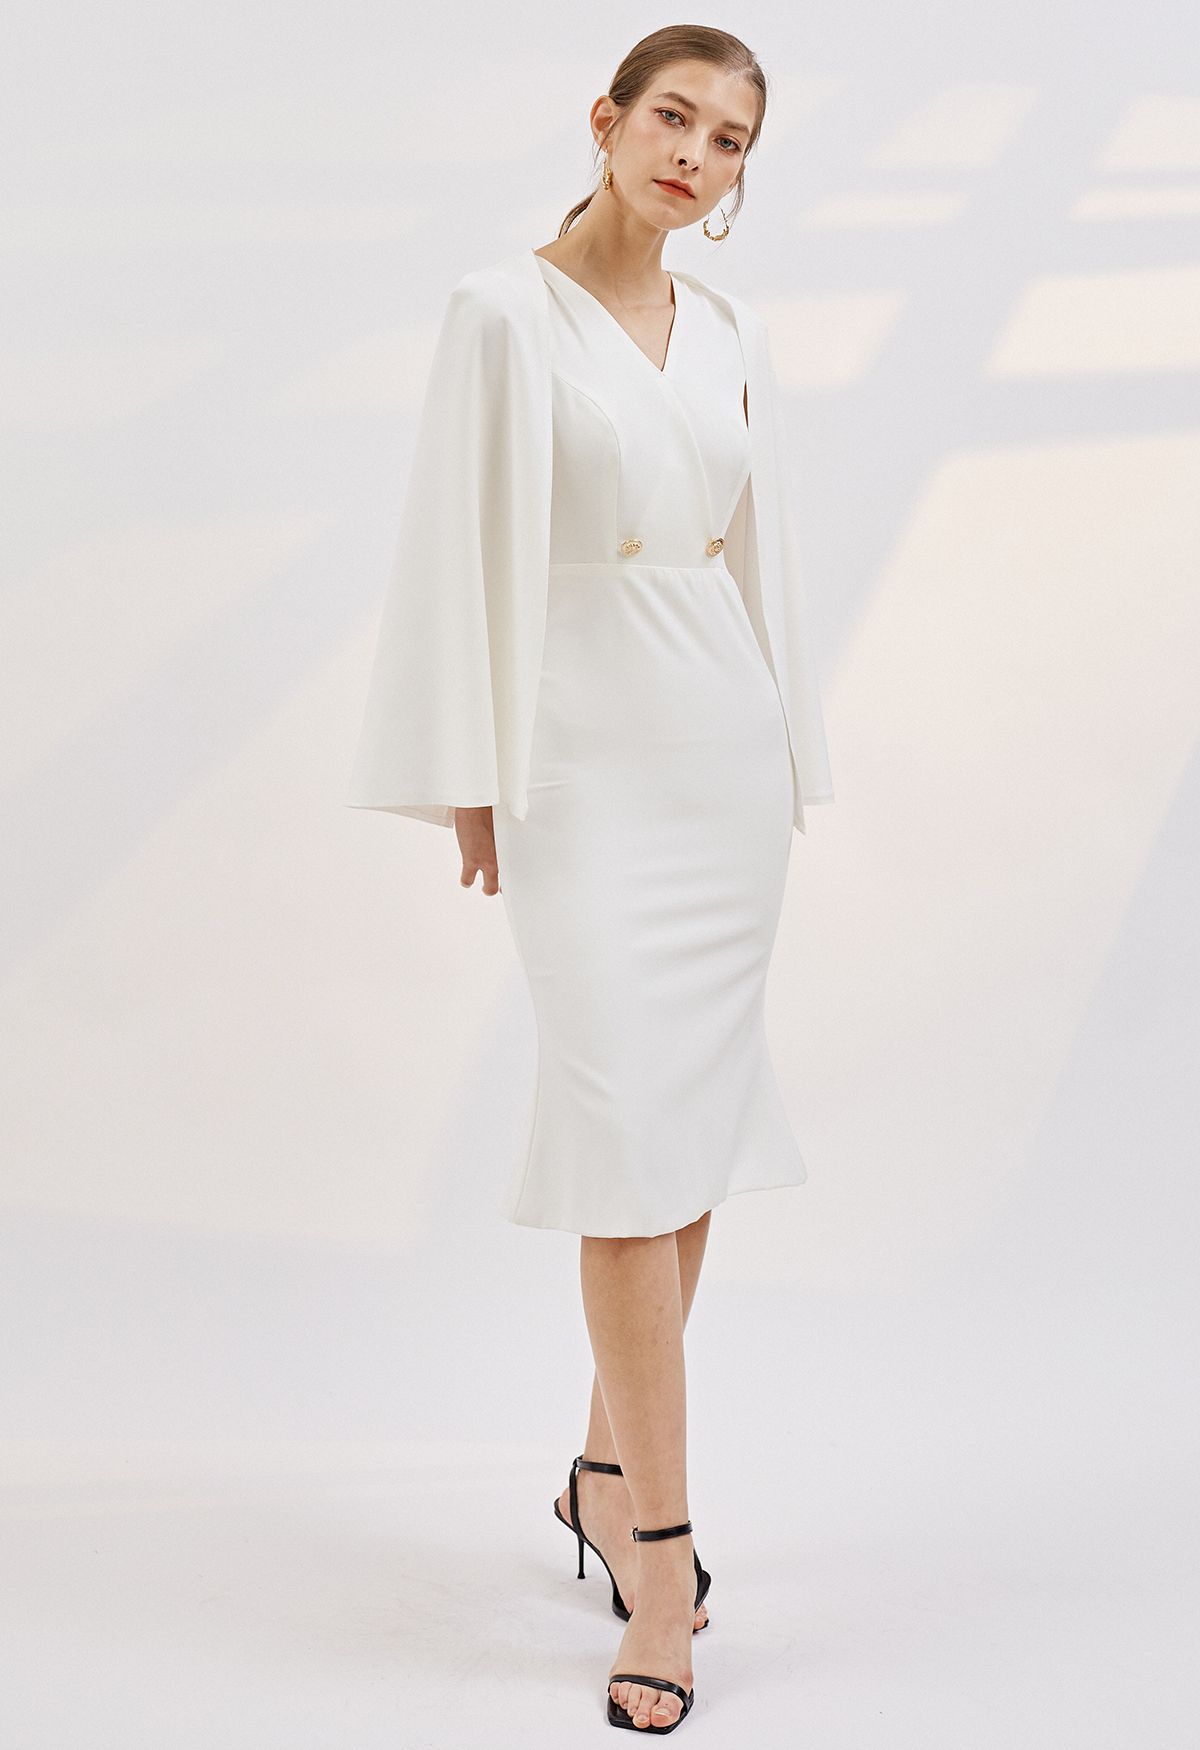 Golden Button Cape Sleeve Cocktail Dress in White